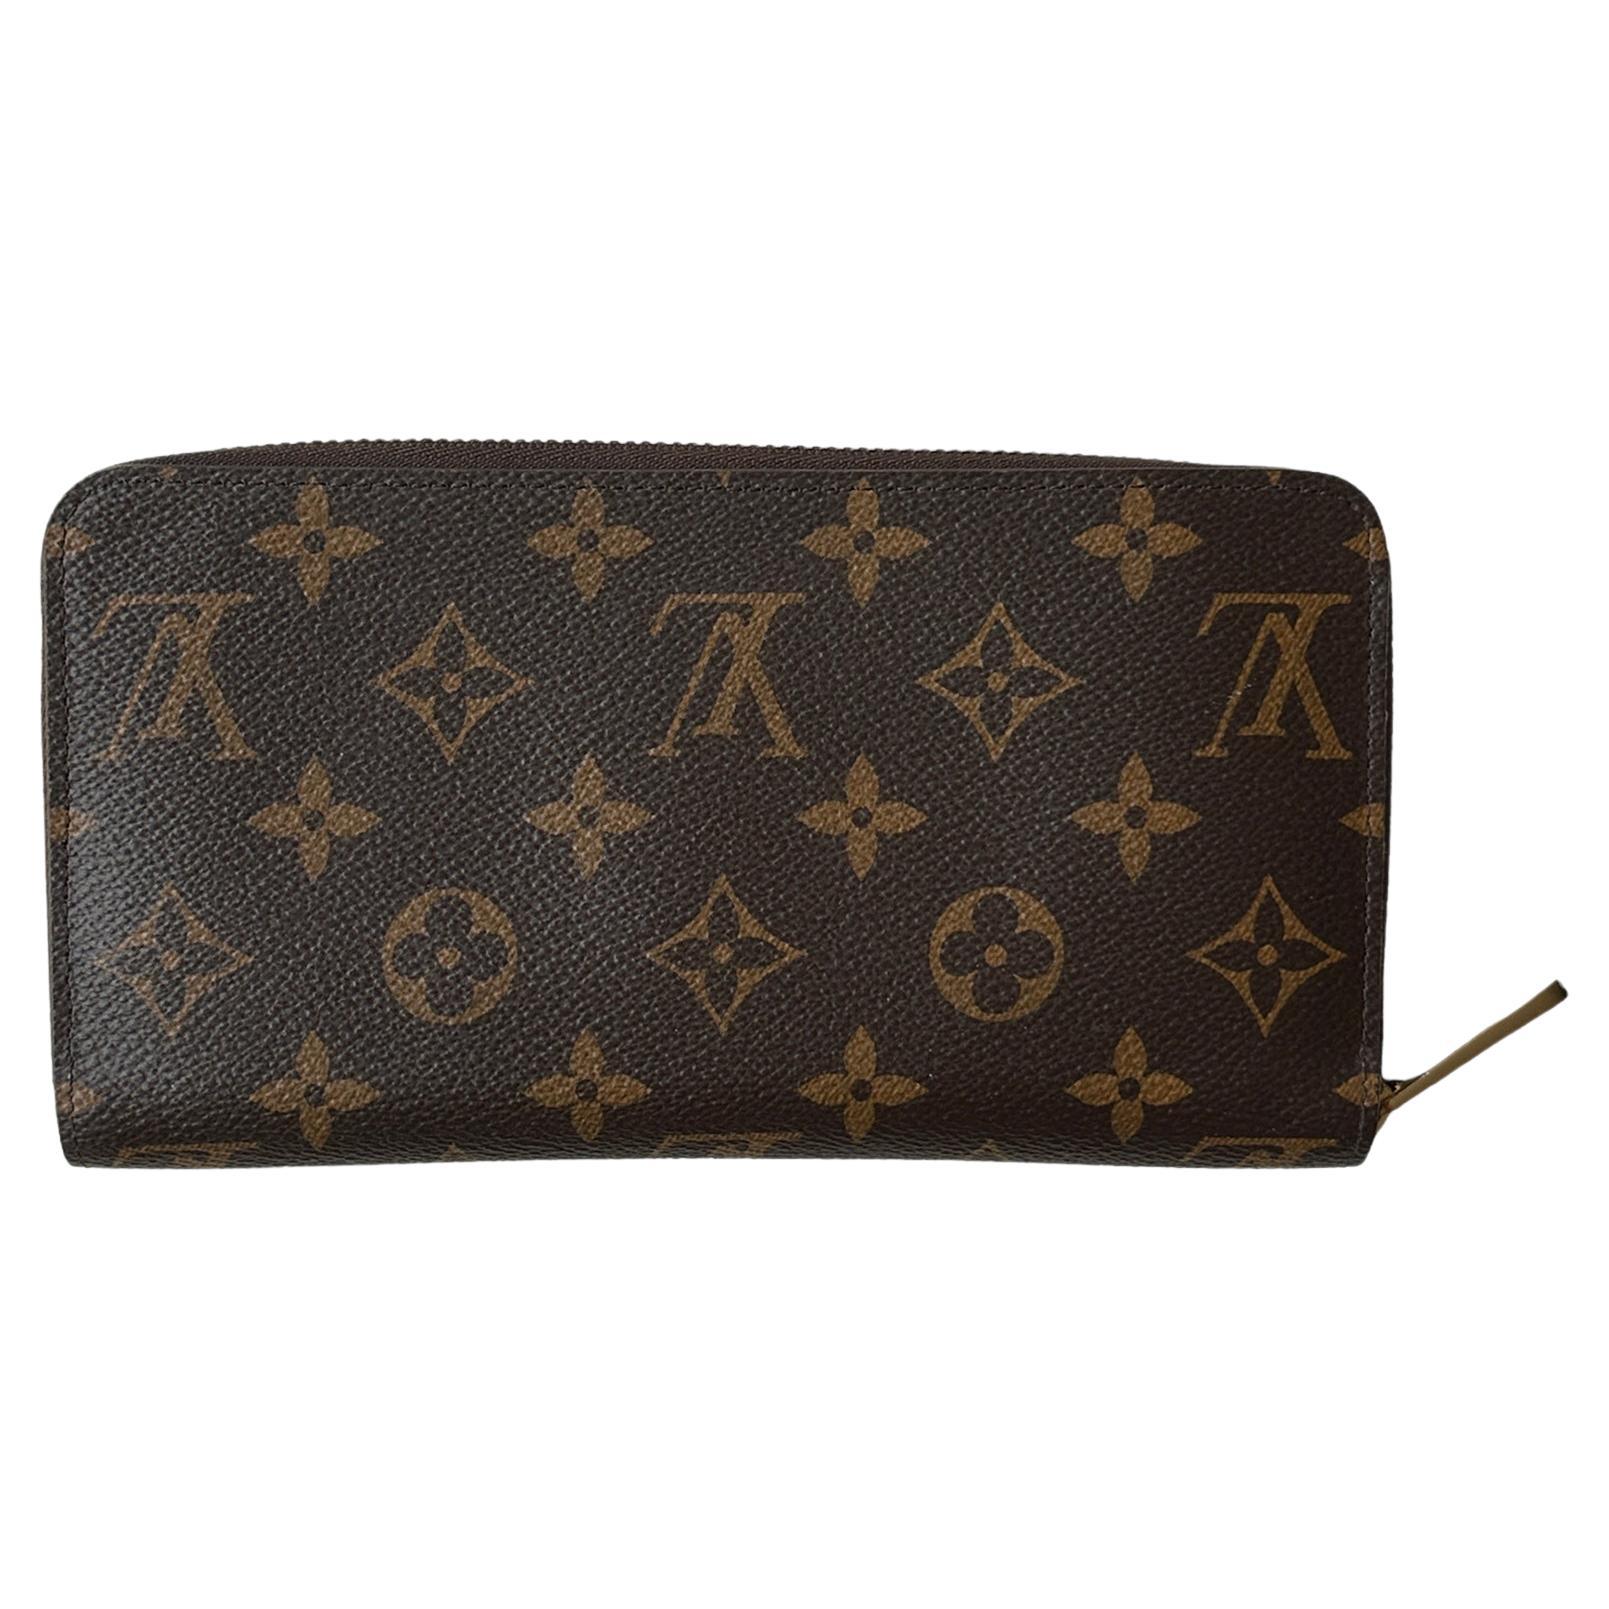 Louis Vuitton Monogram Zippy Wallet

Made In: USA
Color: Brown
Hardware: Goldtone
Materials: Leather
Lining: Leather
Closure/Opening: Zip around
Interior Pocket: 12 card slots, 3 large gusseted compartments, 2 inside flat pockets, zipped coin